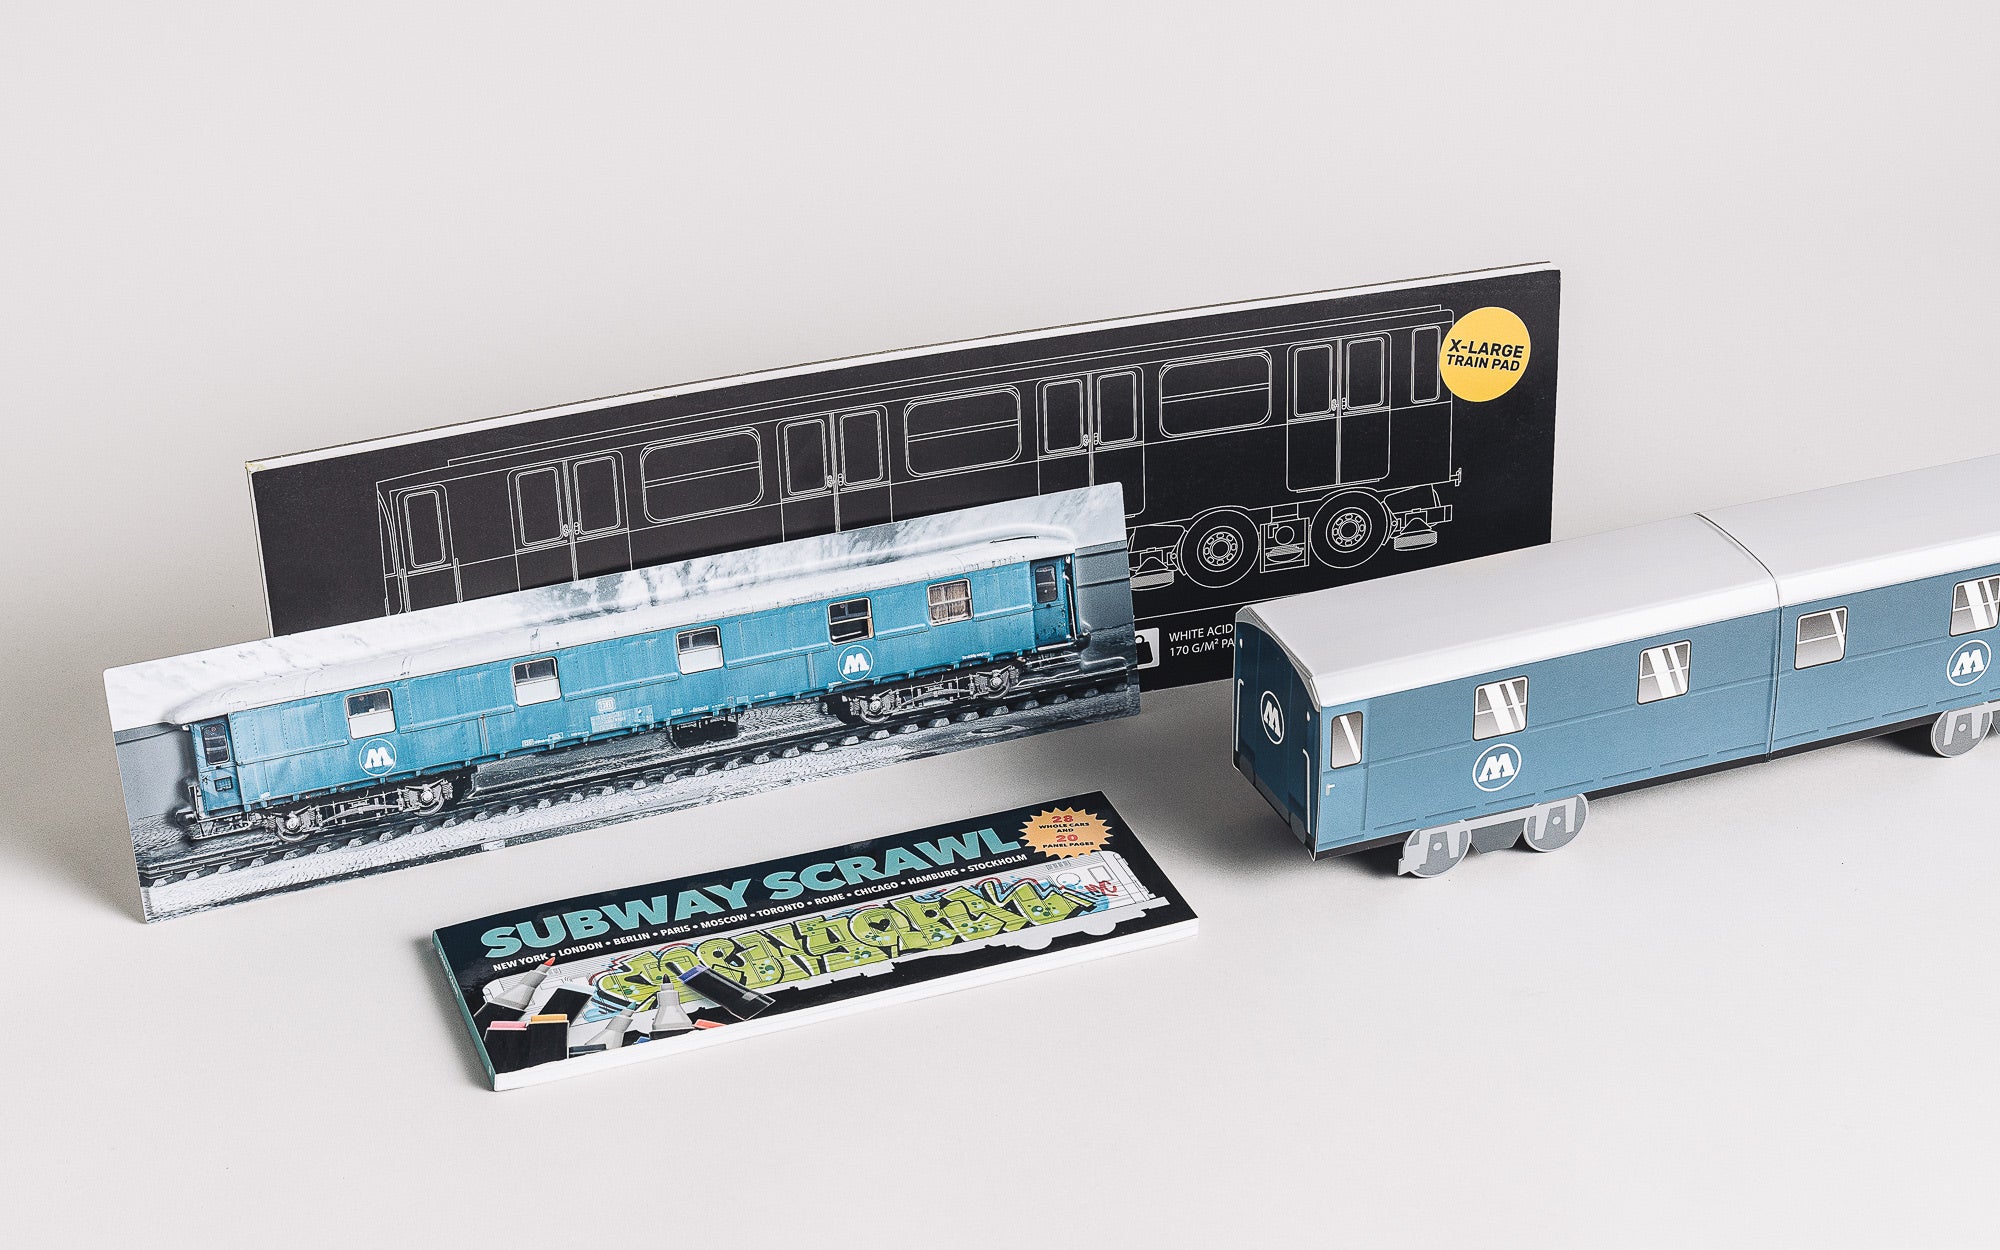 A mini train set with a book and a magazine, all in blue and white.